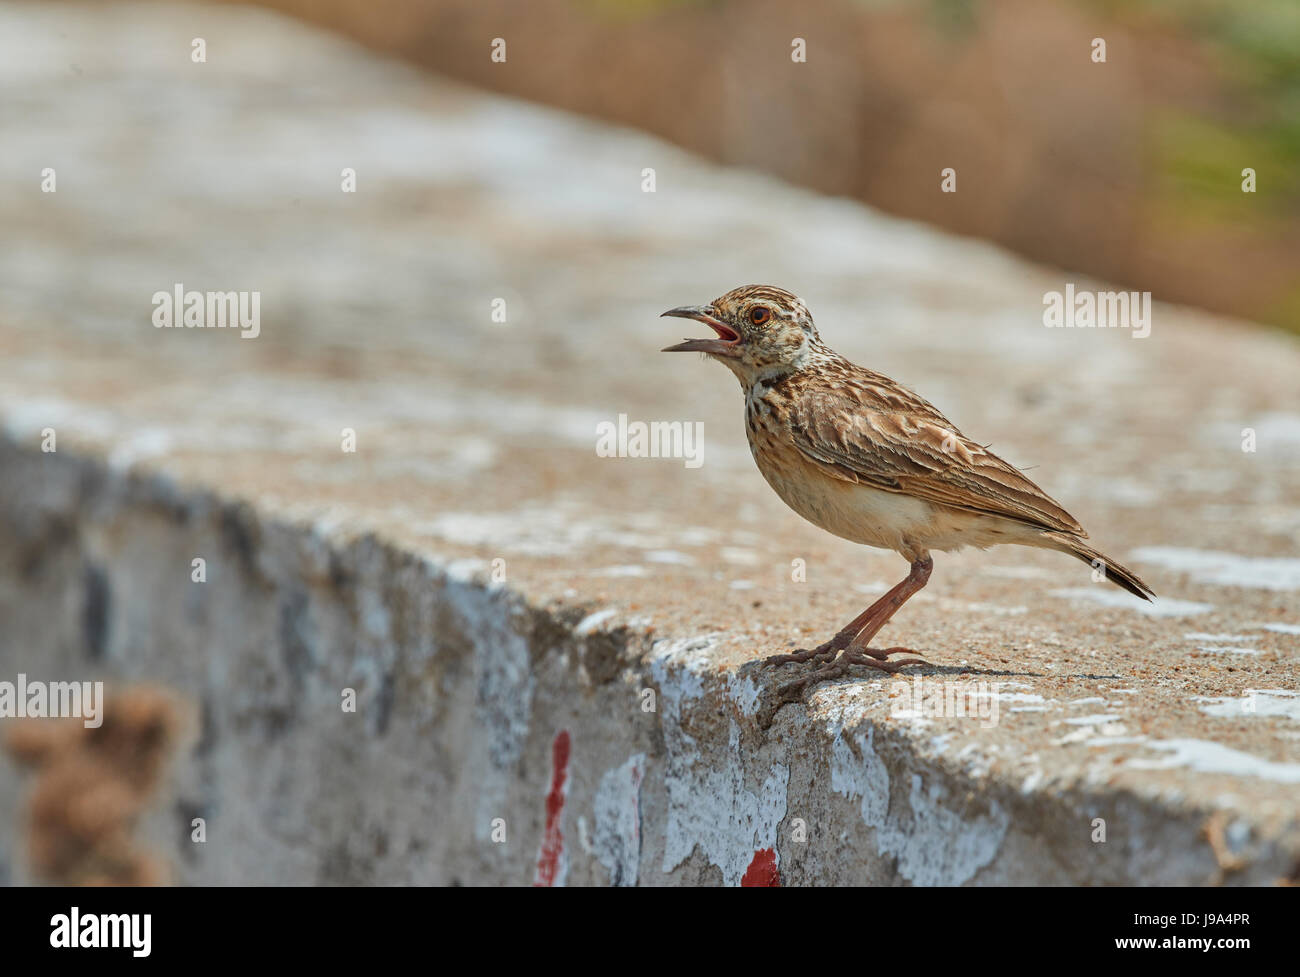 Lark, Common bird species of the family of larks, photographed in their natural environment. Stock Photo